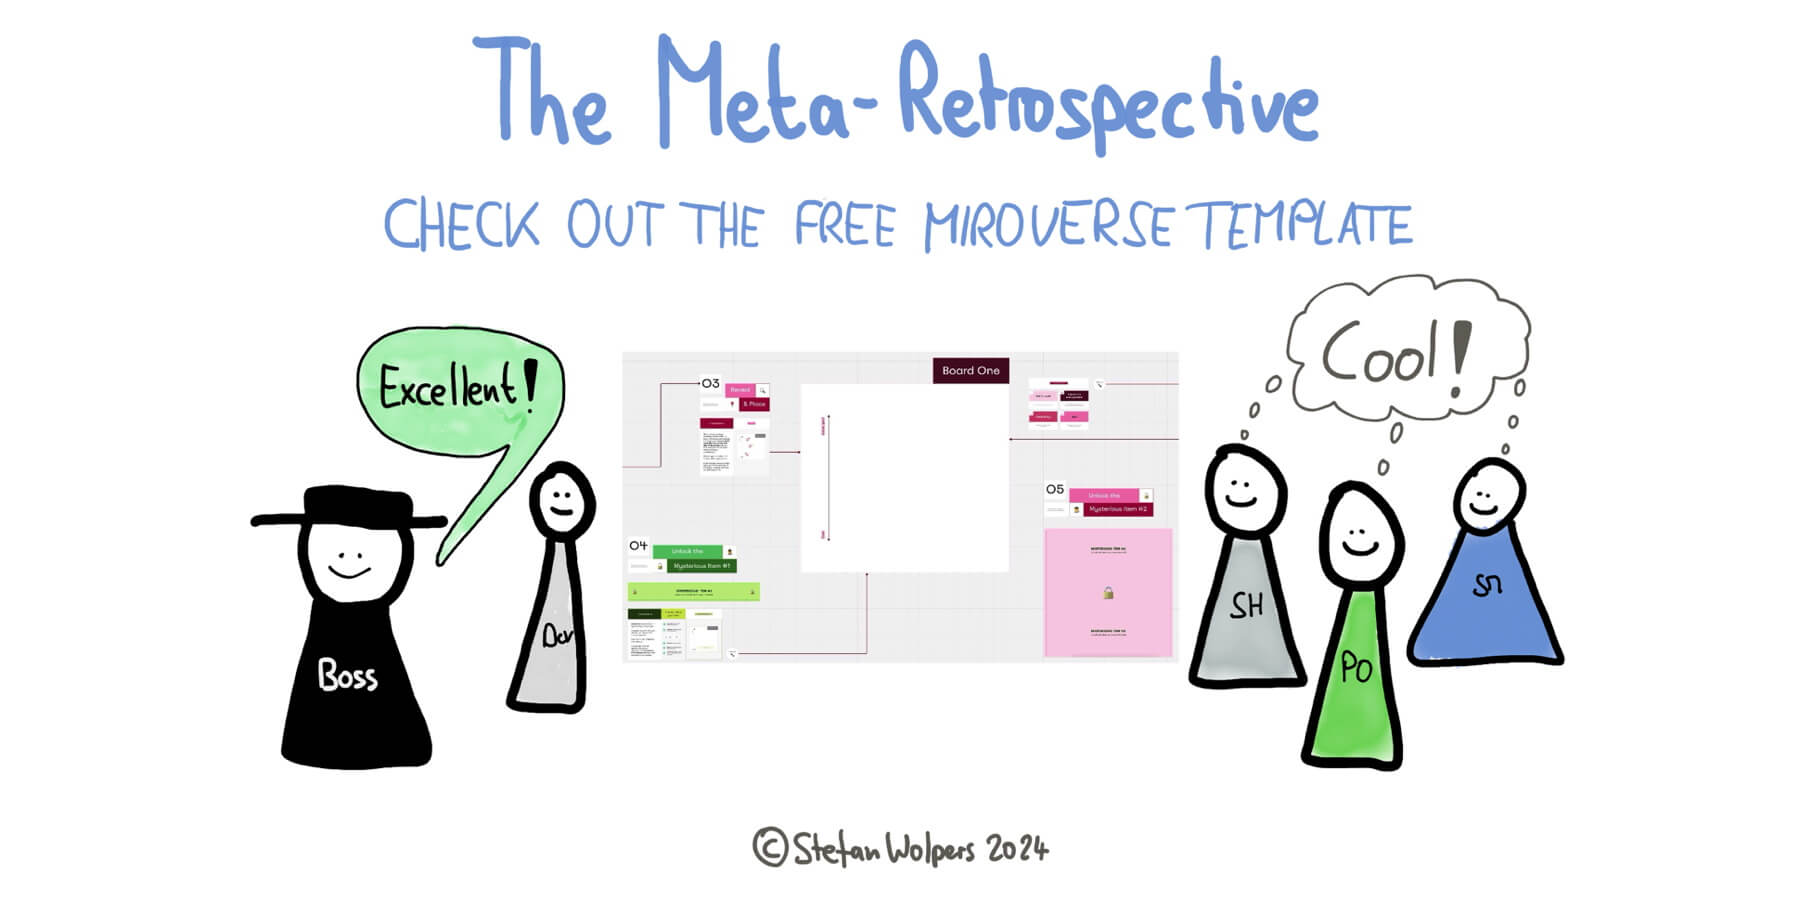 The Meta-Retrospective — Check Out the Free Miroverse Template